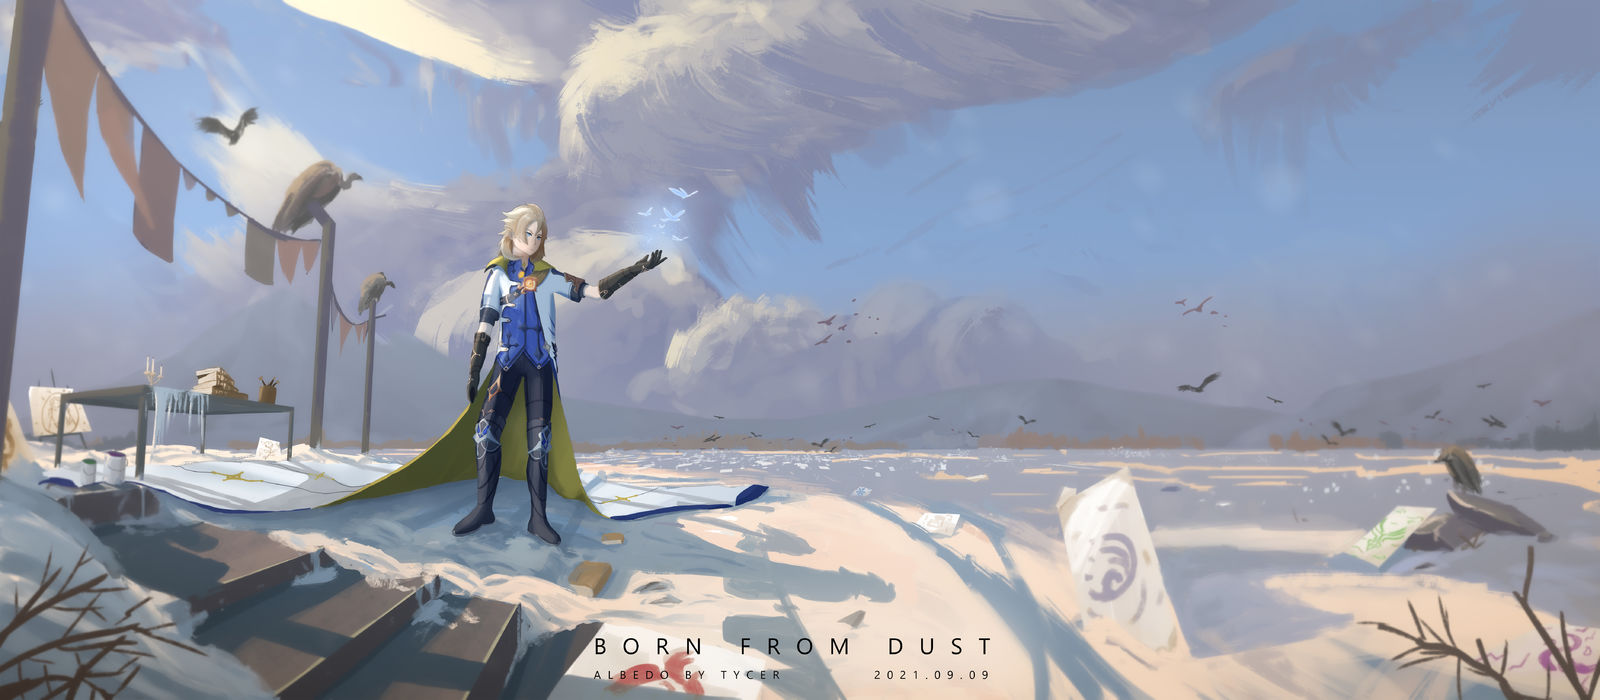 Born from dust